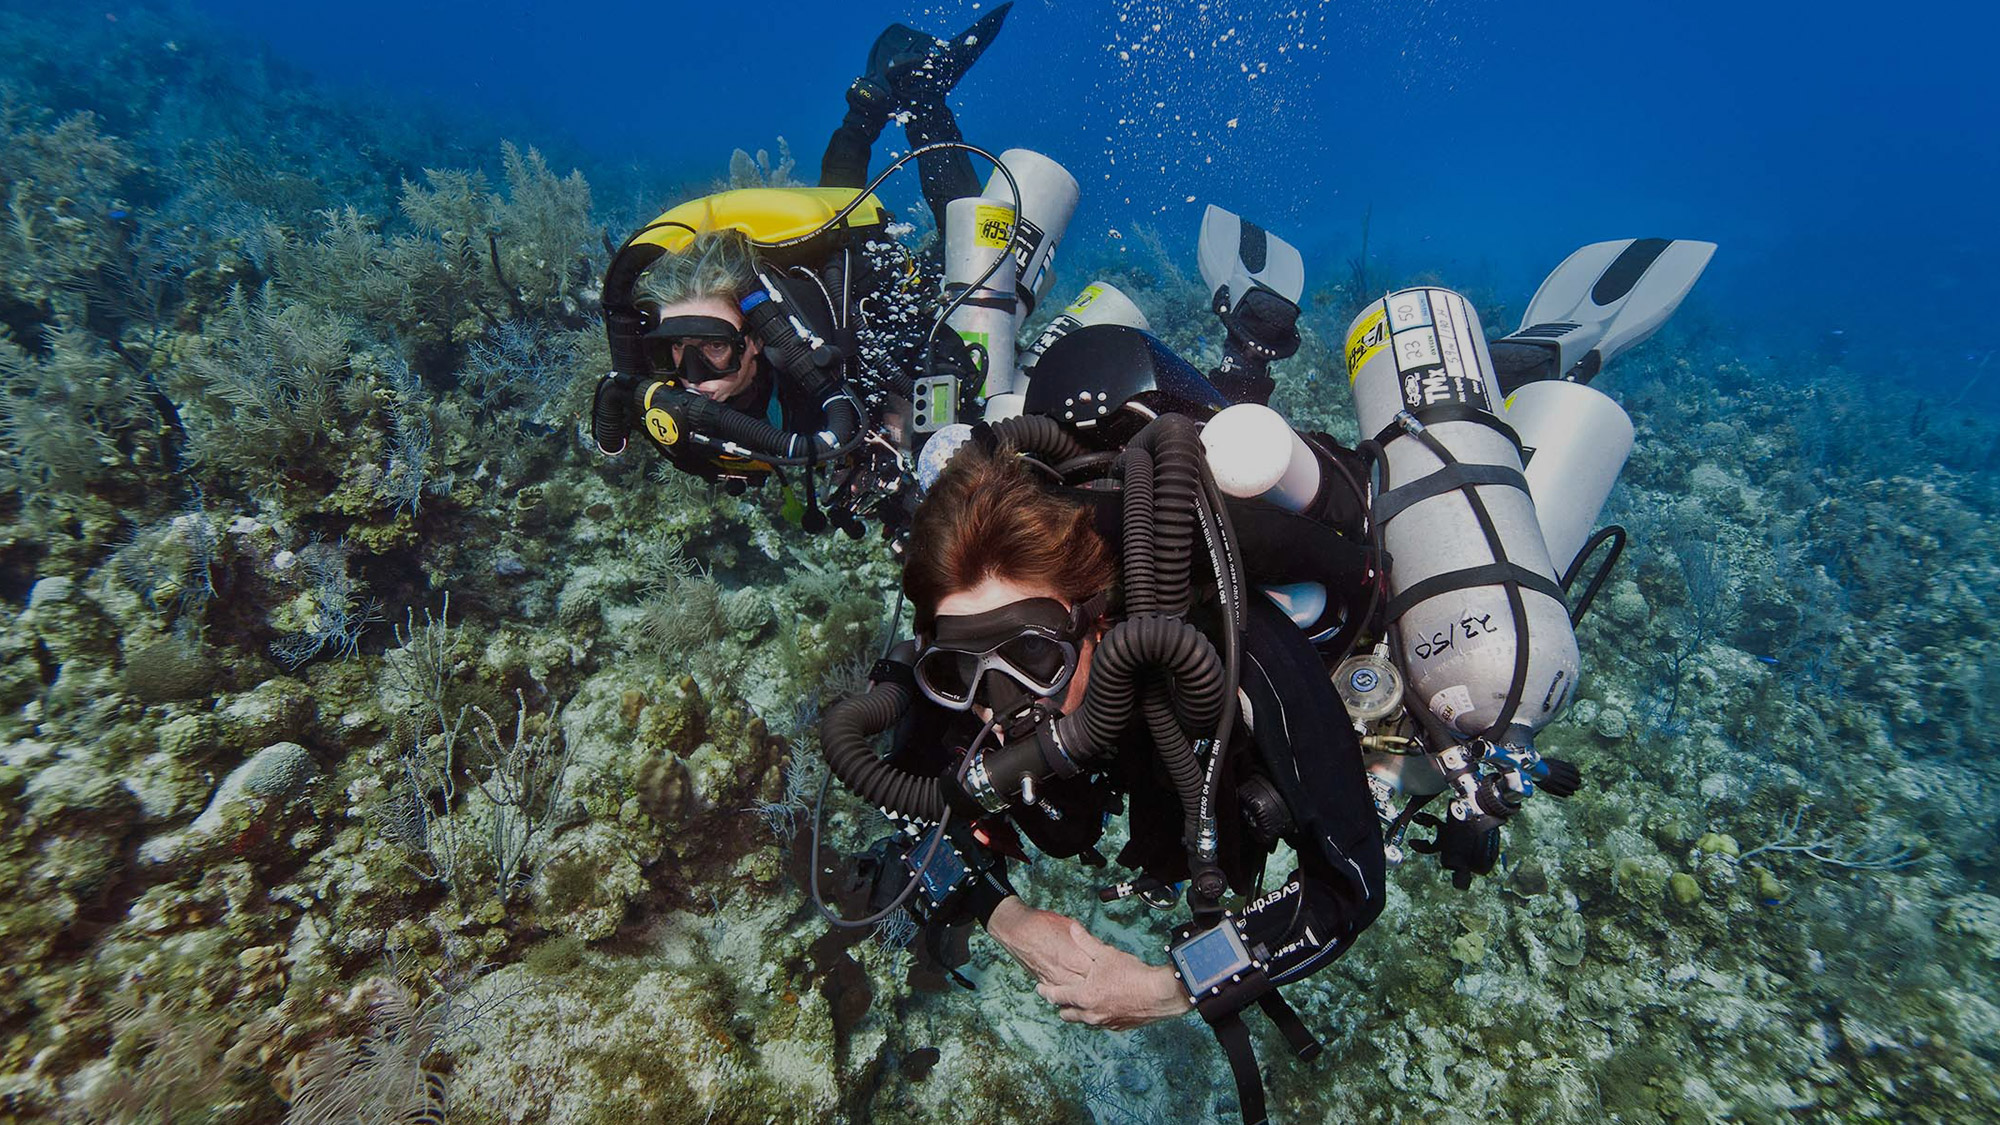 Discover New Diving Opportunities With Technical Diving